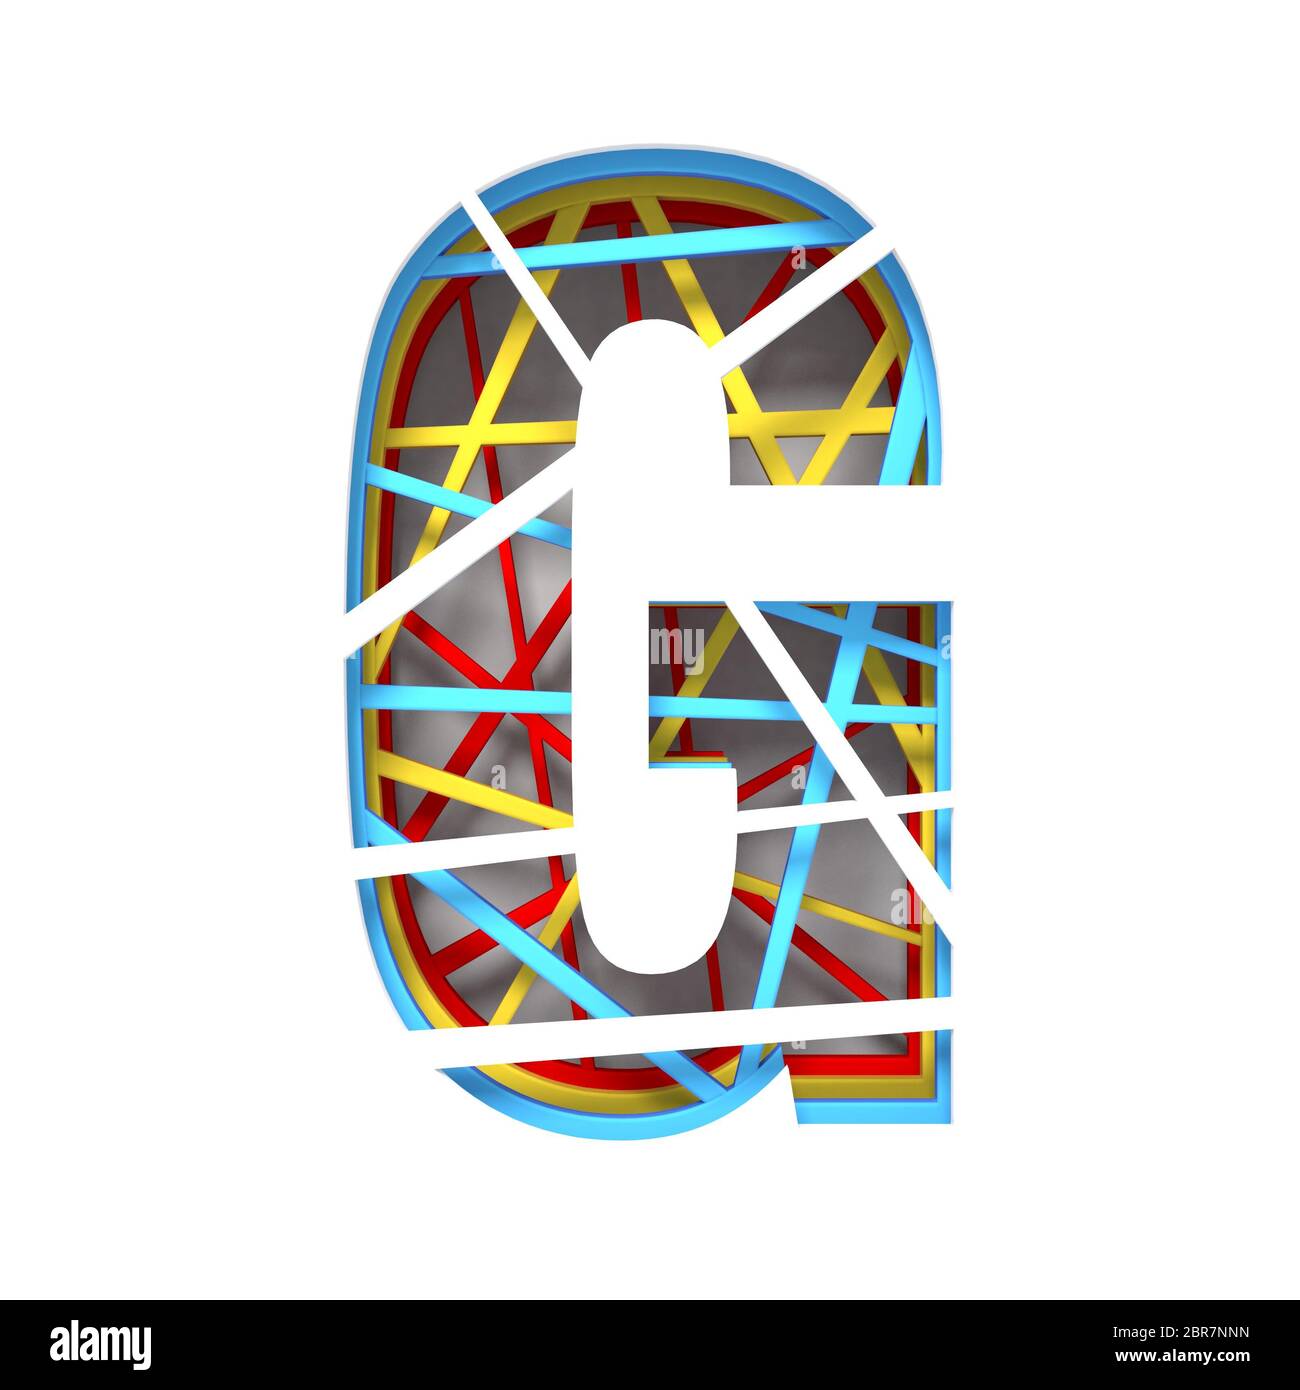 Colorful paper cut out font Letter G 3D render illustration isolated on white background Stock Photo